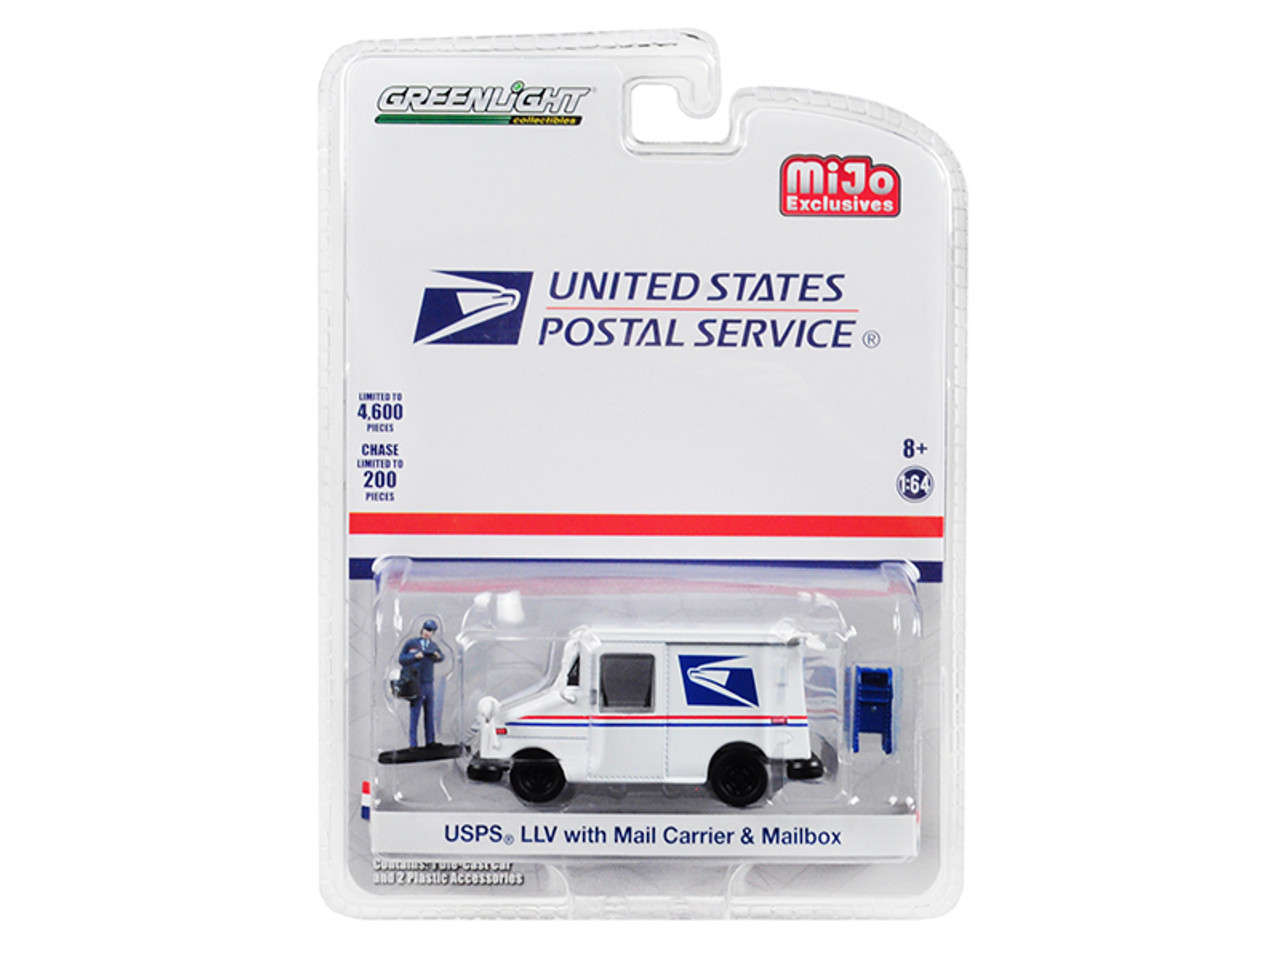 USPS (United States Postal Service) LLV Postal Mail Delivery Vehicle with Mail Carrier and Mailbox Accessories Limited Edition to 4,600 pieces Worldwide 1/64 Diecast Model Car by Greenlight